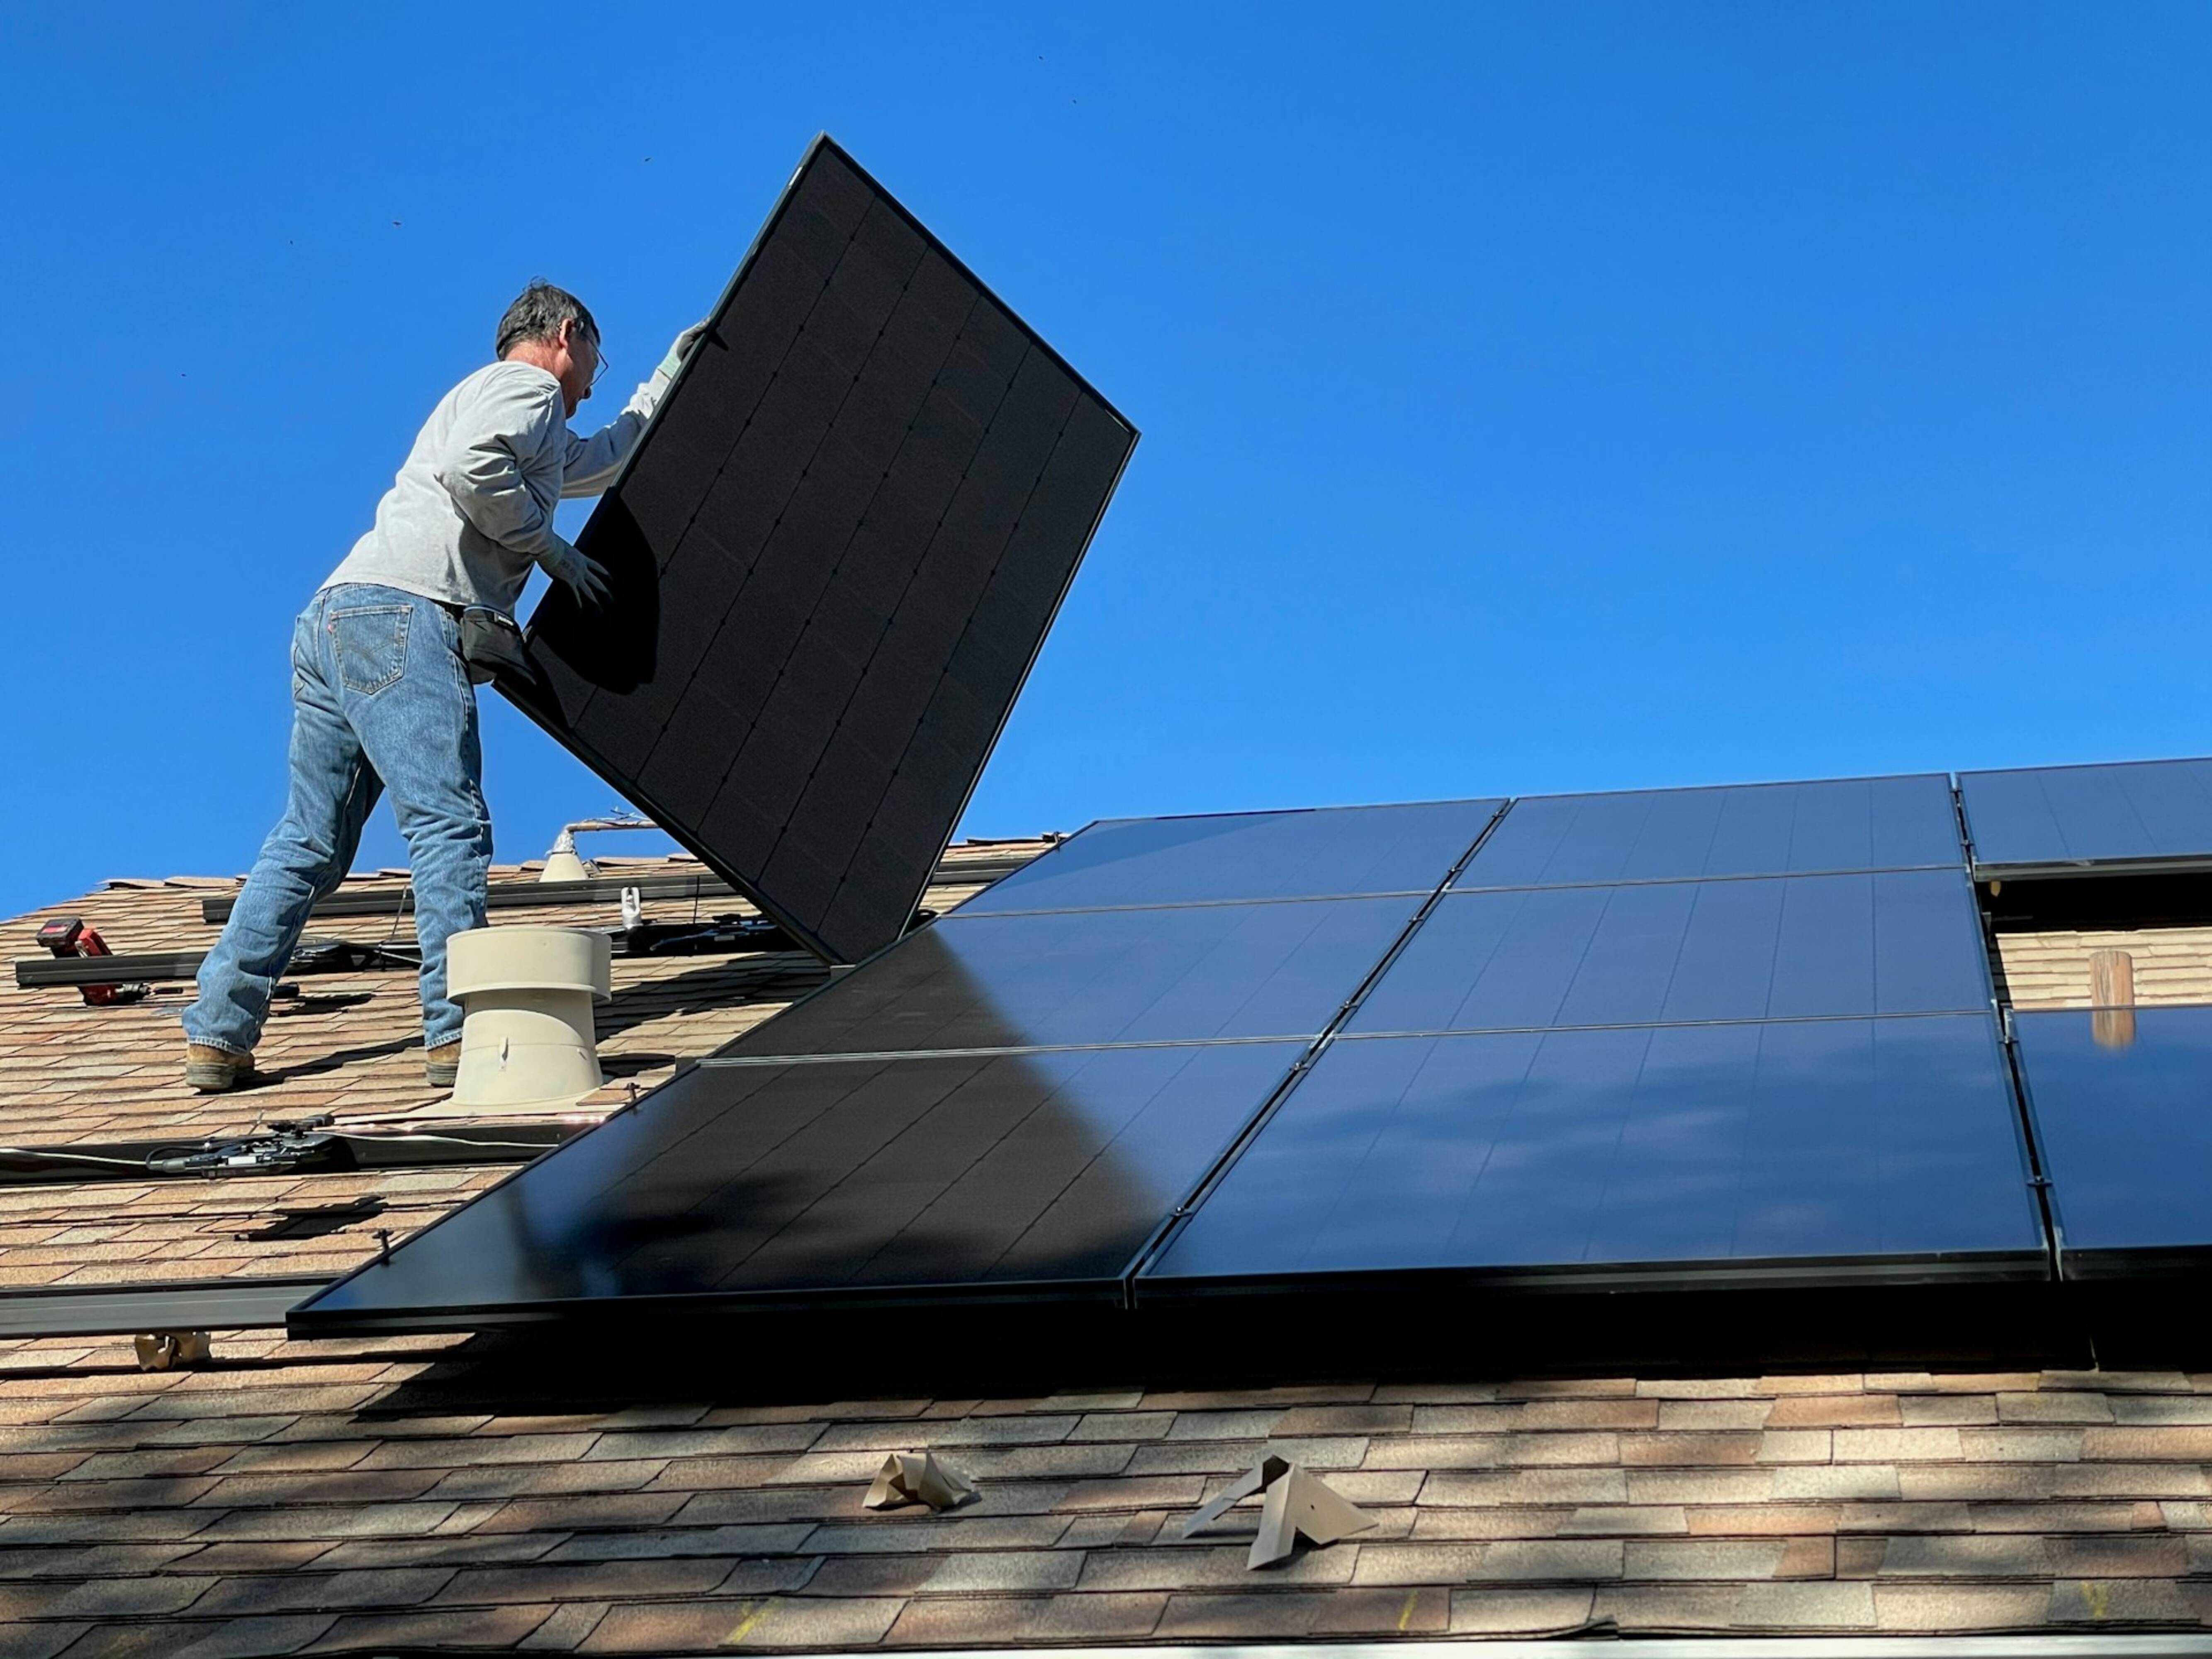 Setting up solar panels on a roof
